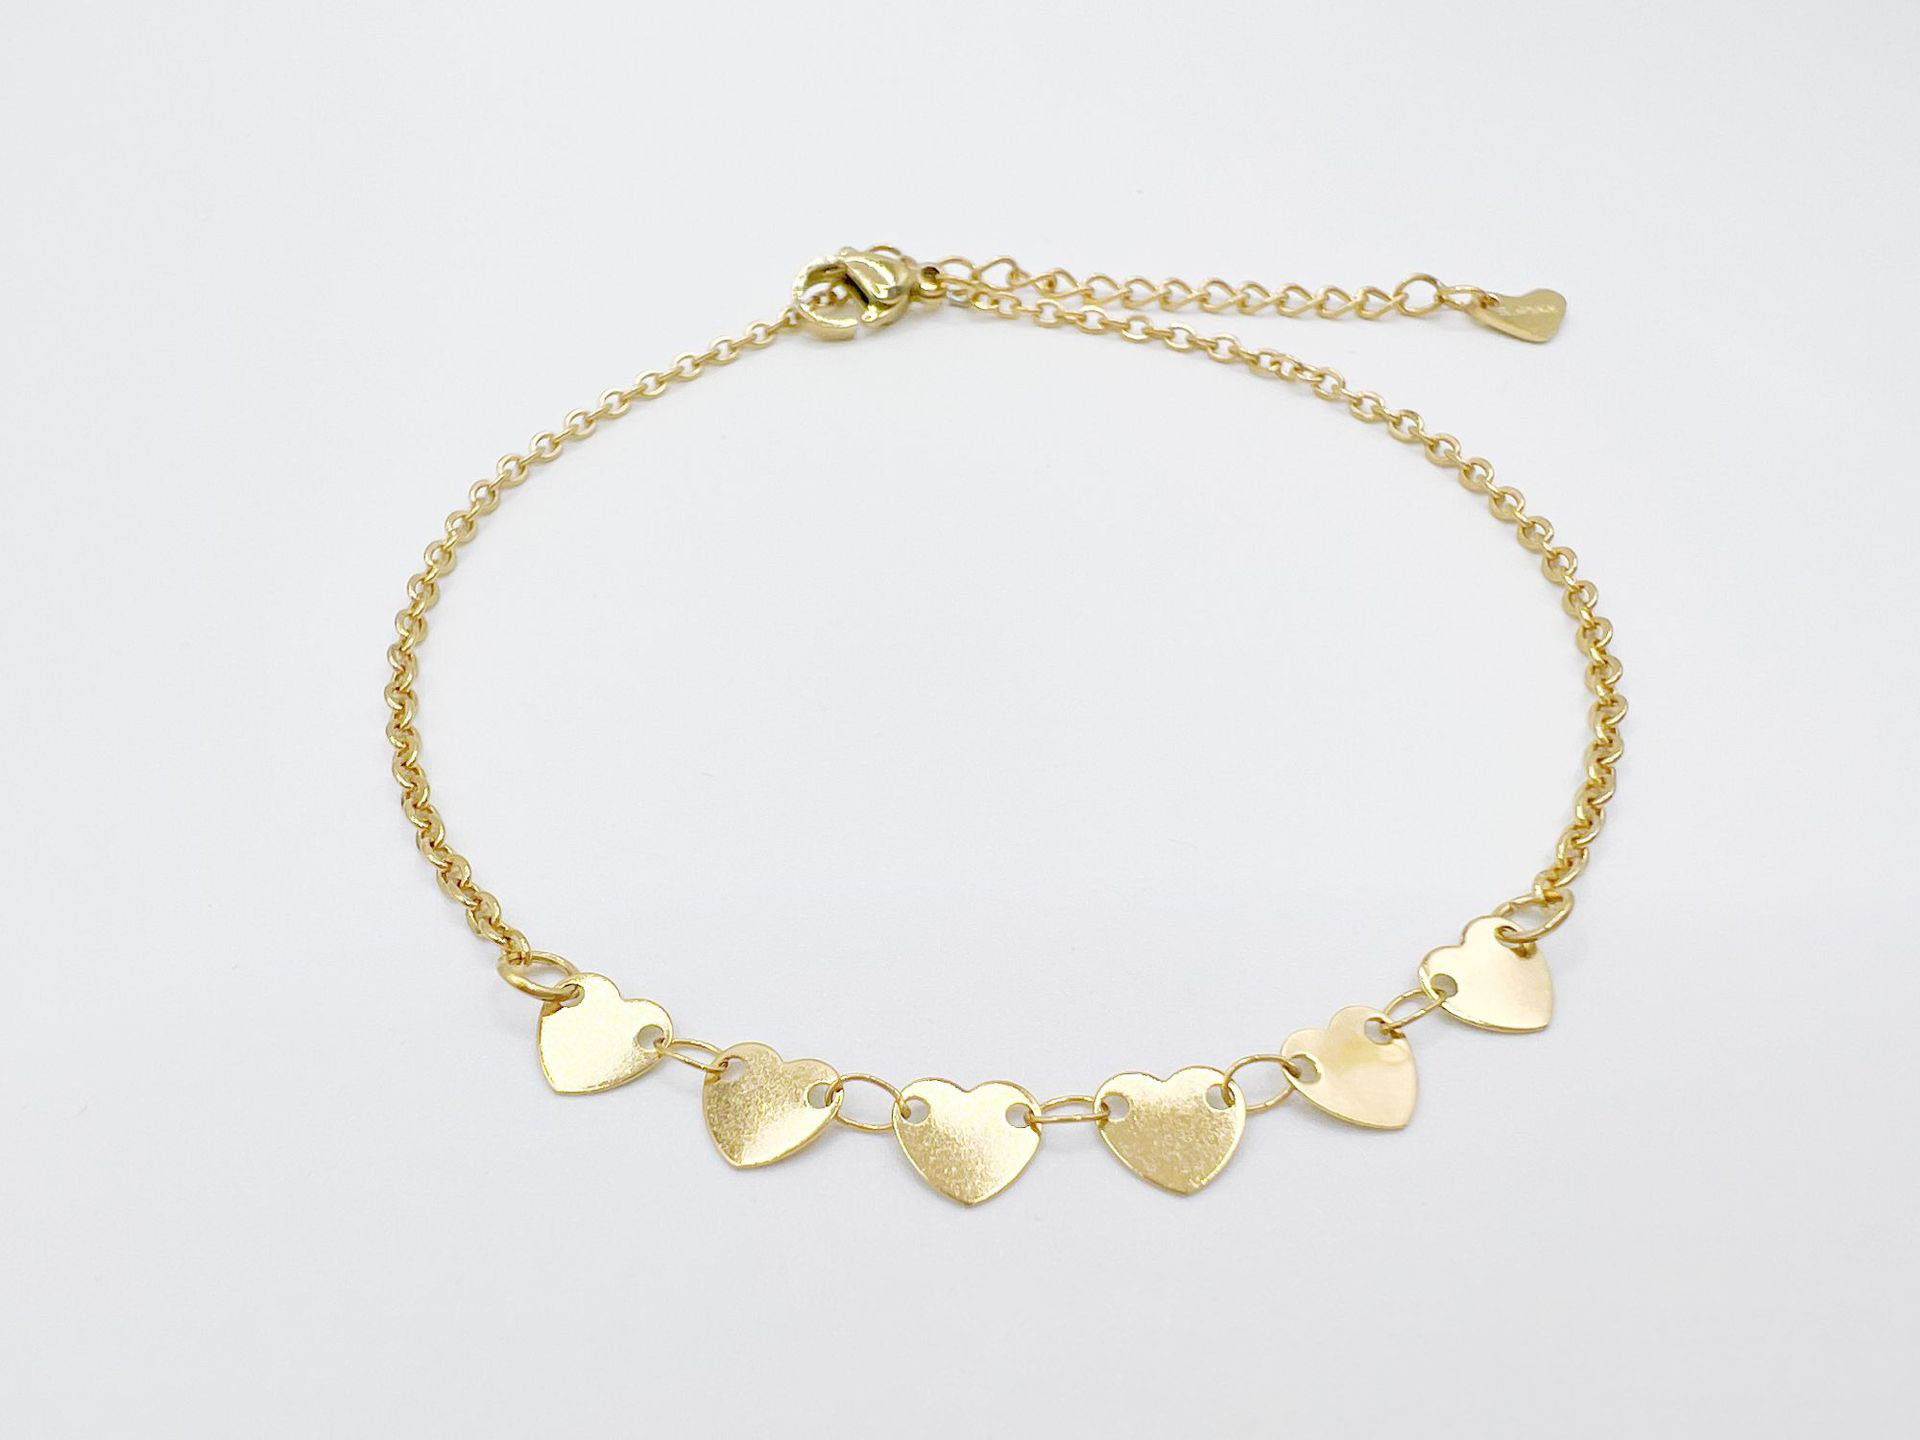 Heart-shaped gold color